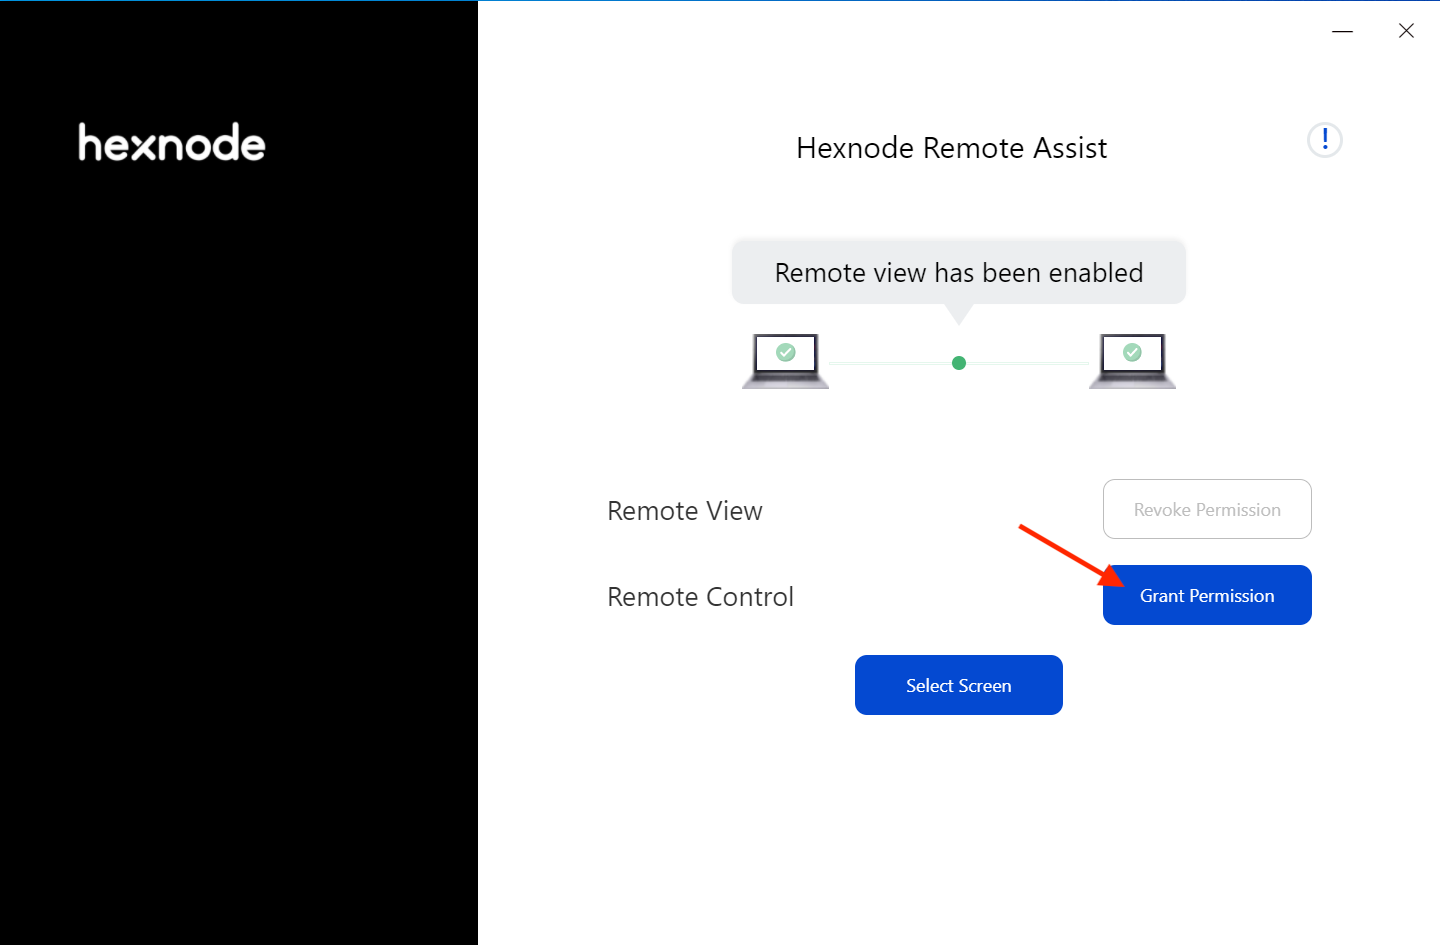 Grant permission for a remote control session on Hexnode Remote Assist app